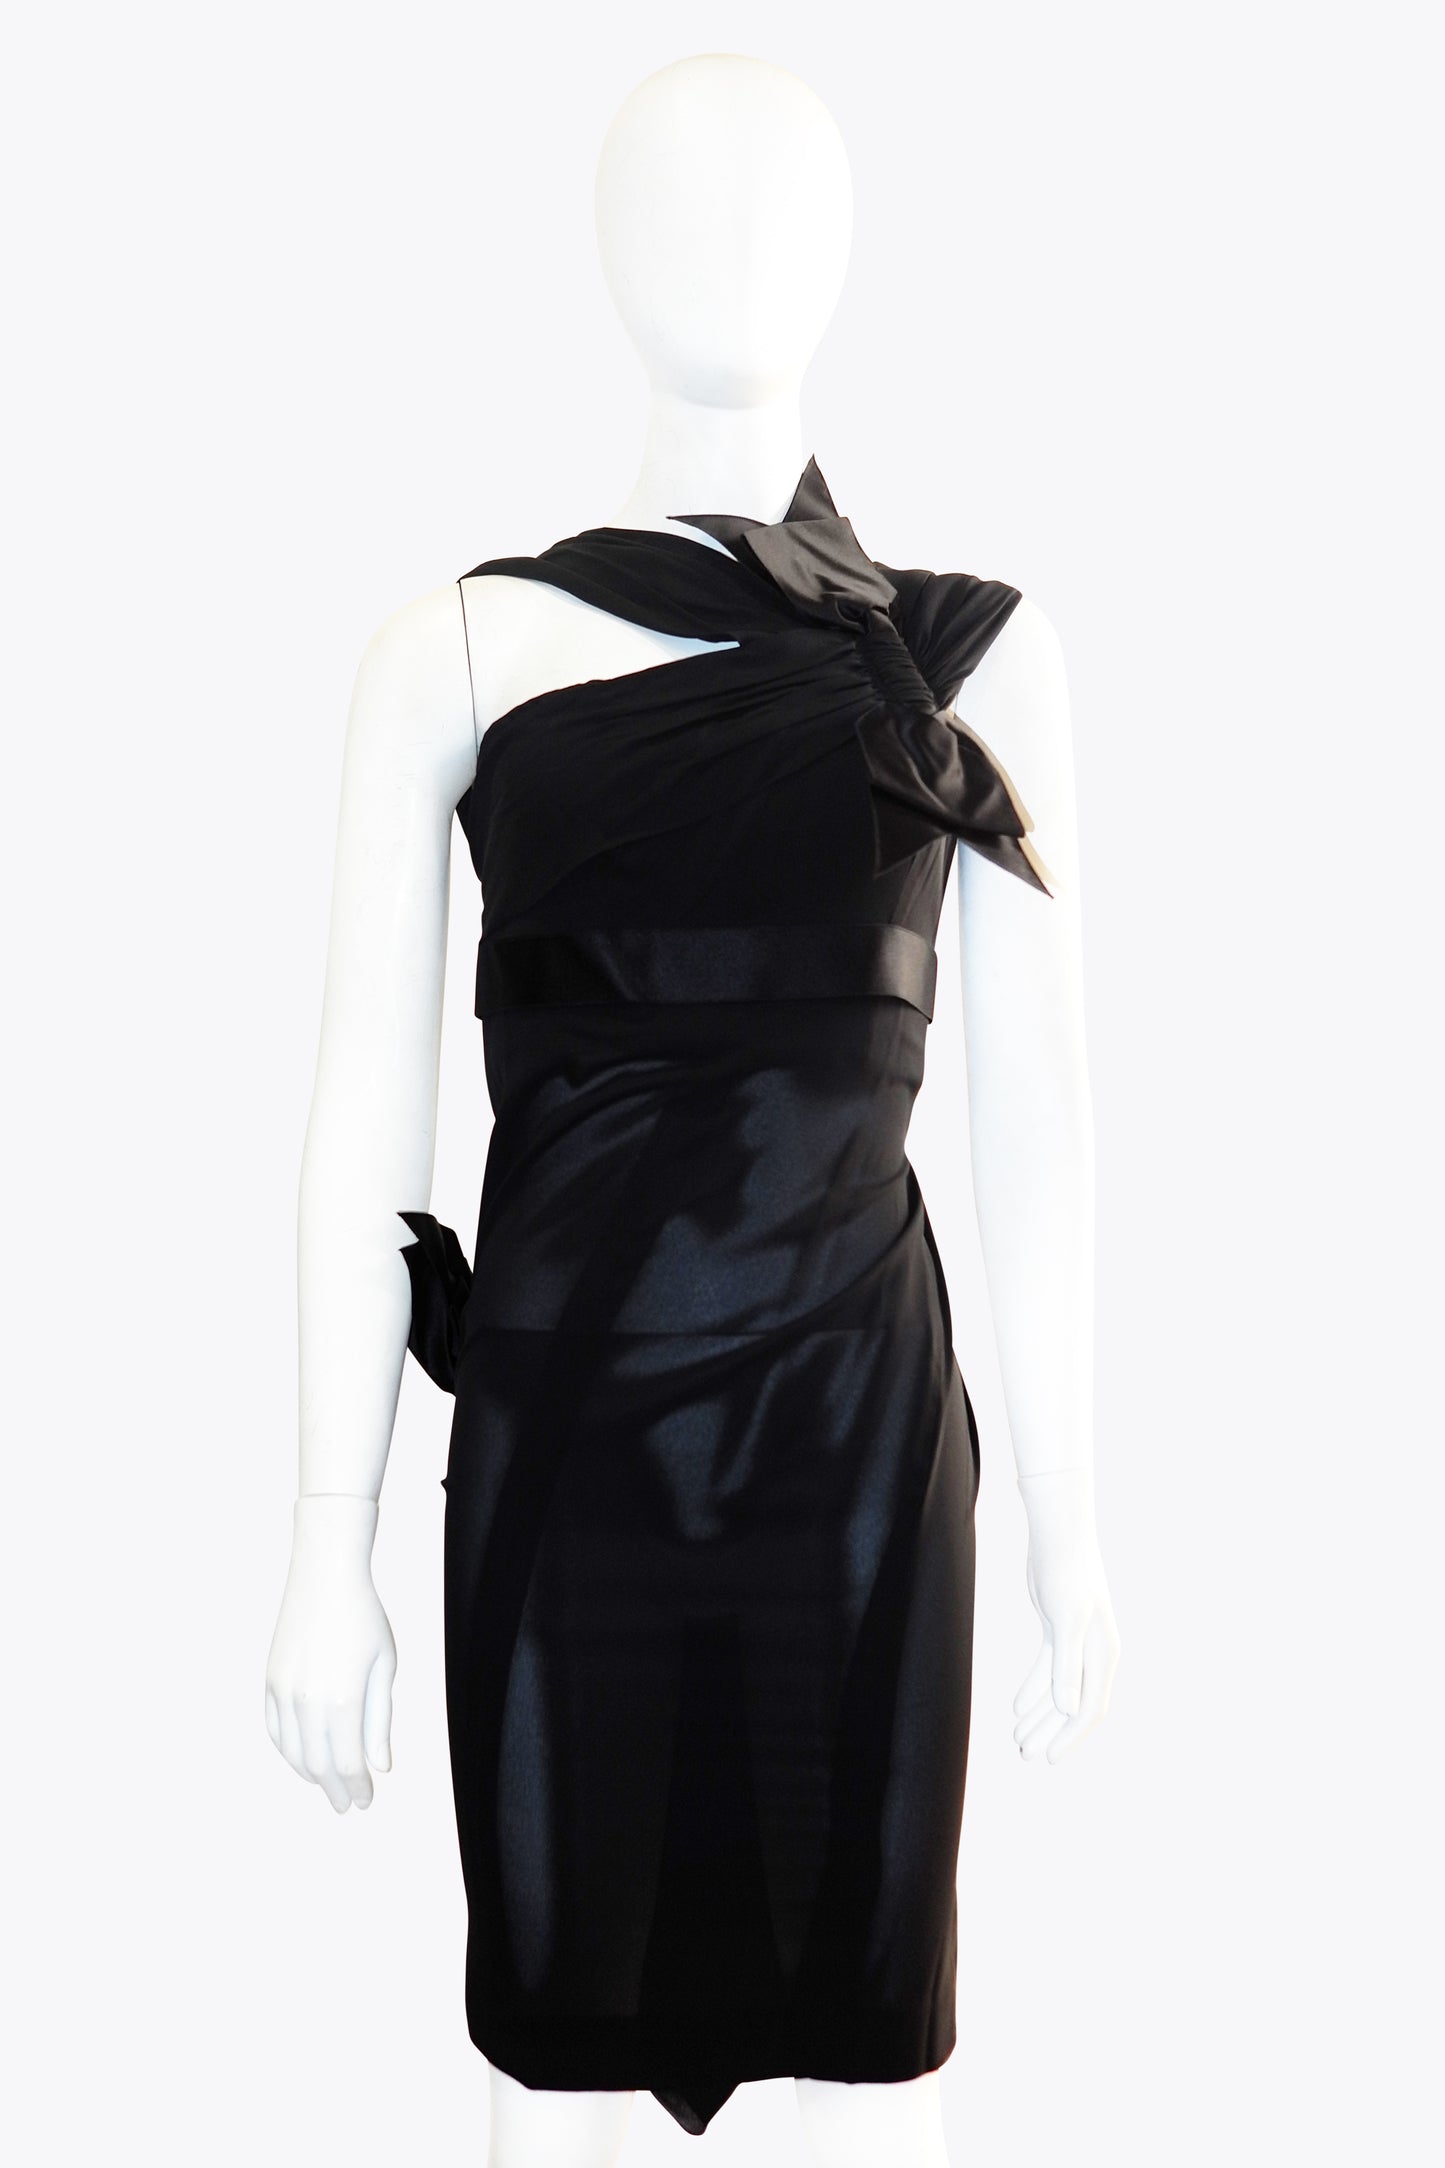 Chanel Black Dress With Large Bow Details